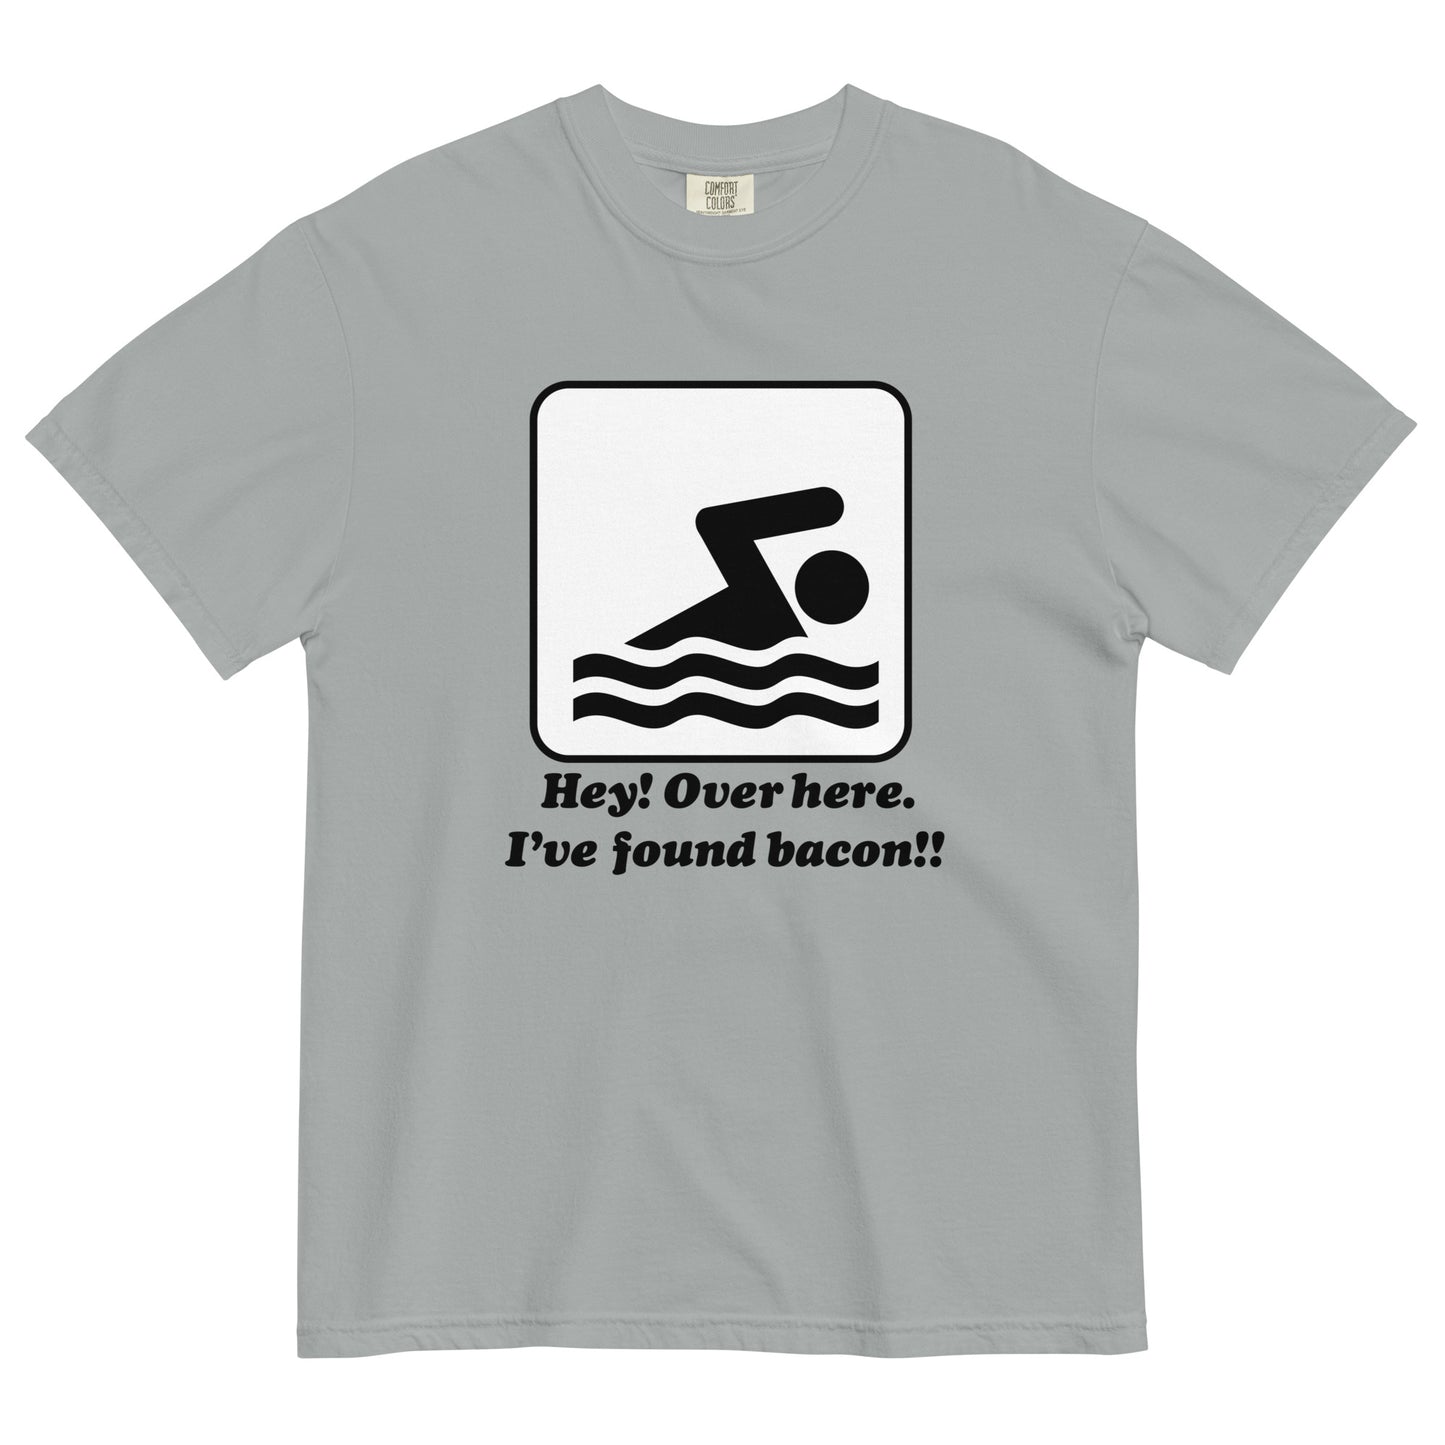 I've Found Bacon! Men's Relaxed Fit Tee